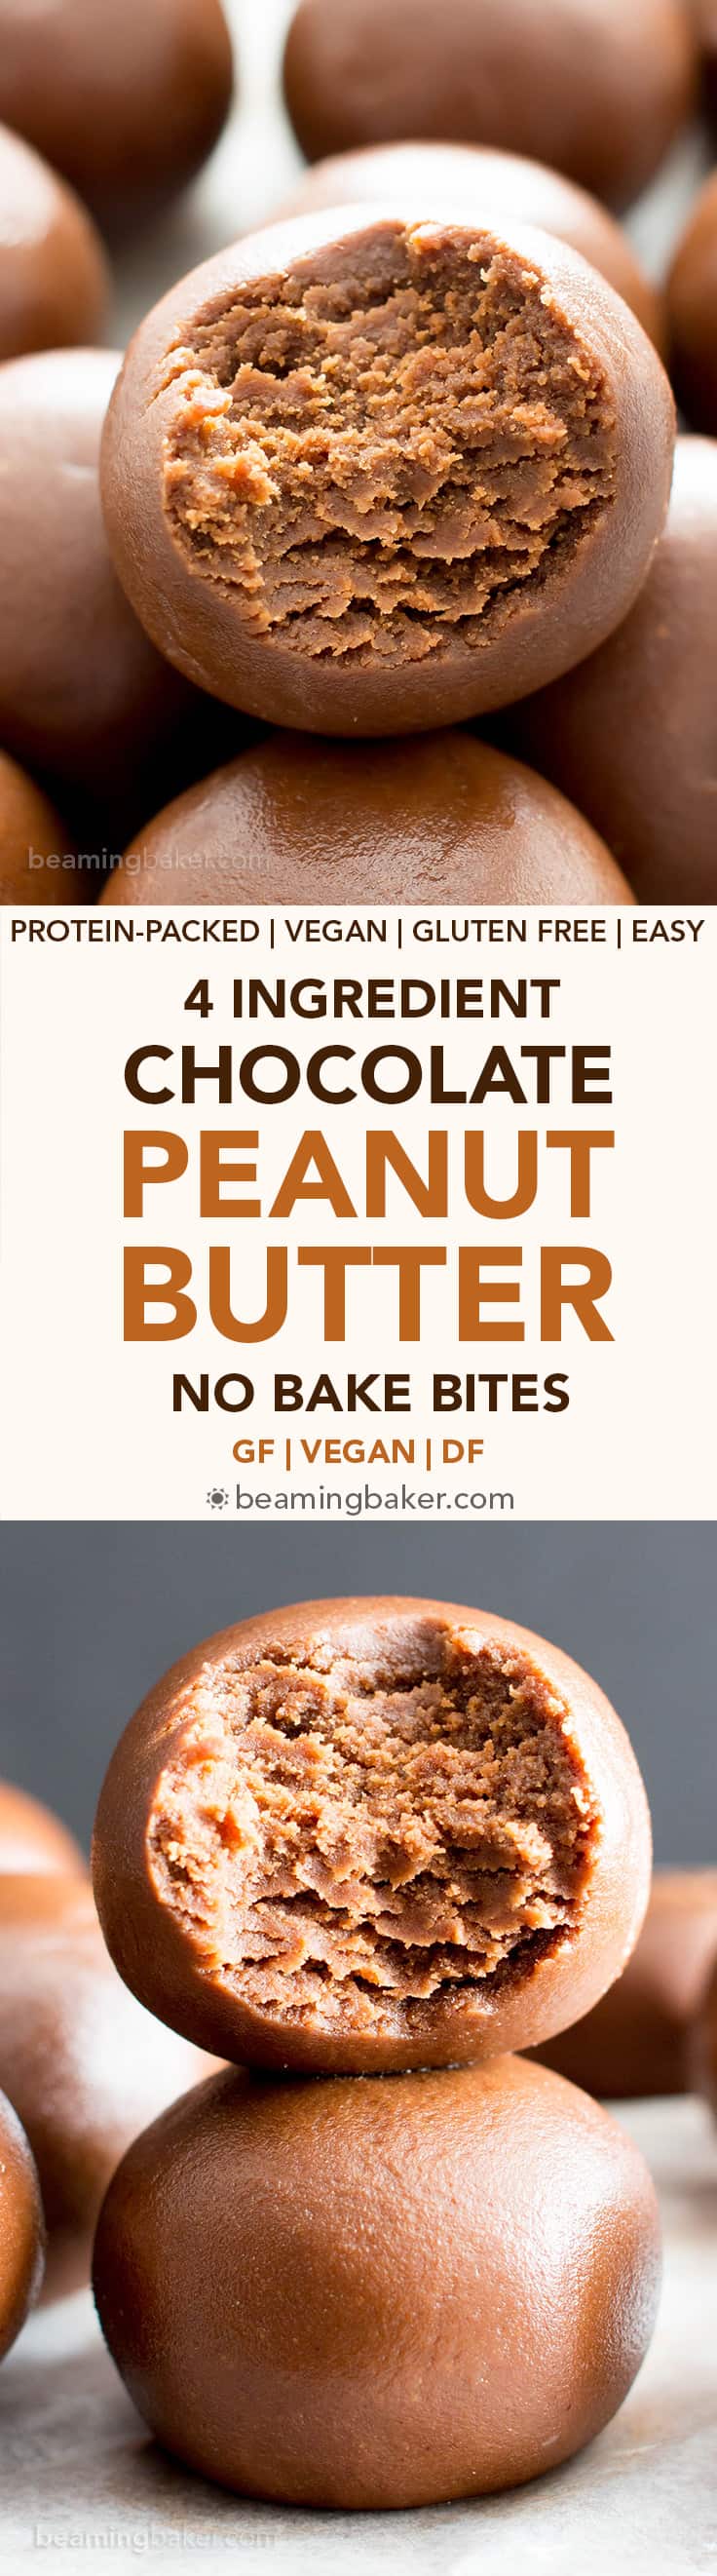 4 Ingredient Chocolate Peanut Butter No Bake Energy Bites Recipe (V, GF): an easy, one bowl recipe for irresistible no bake bites packed with peanut butter and chocolate flavor! #Vegan #GlutenFree #DairyFree #PeanutButter #Chocolate #NoBake #Snacks | Recipe on BeamingBaker.com